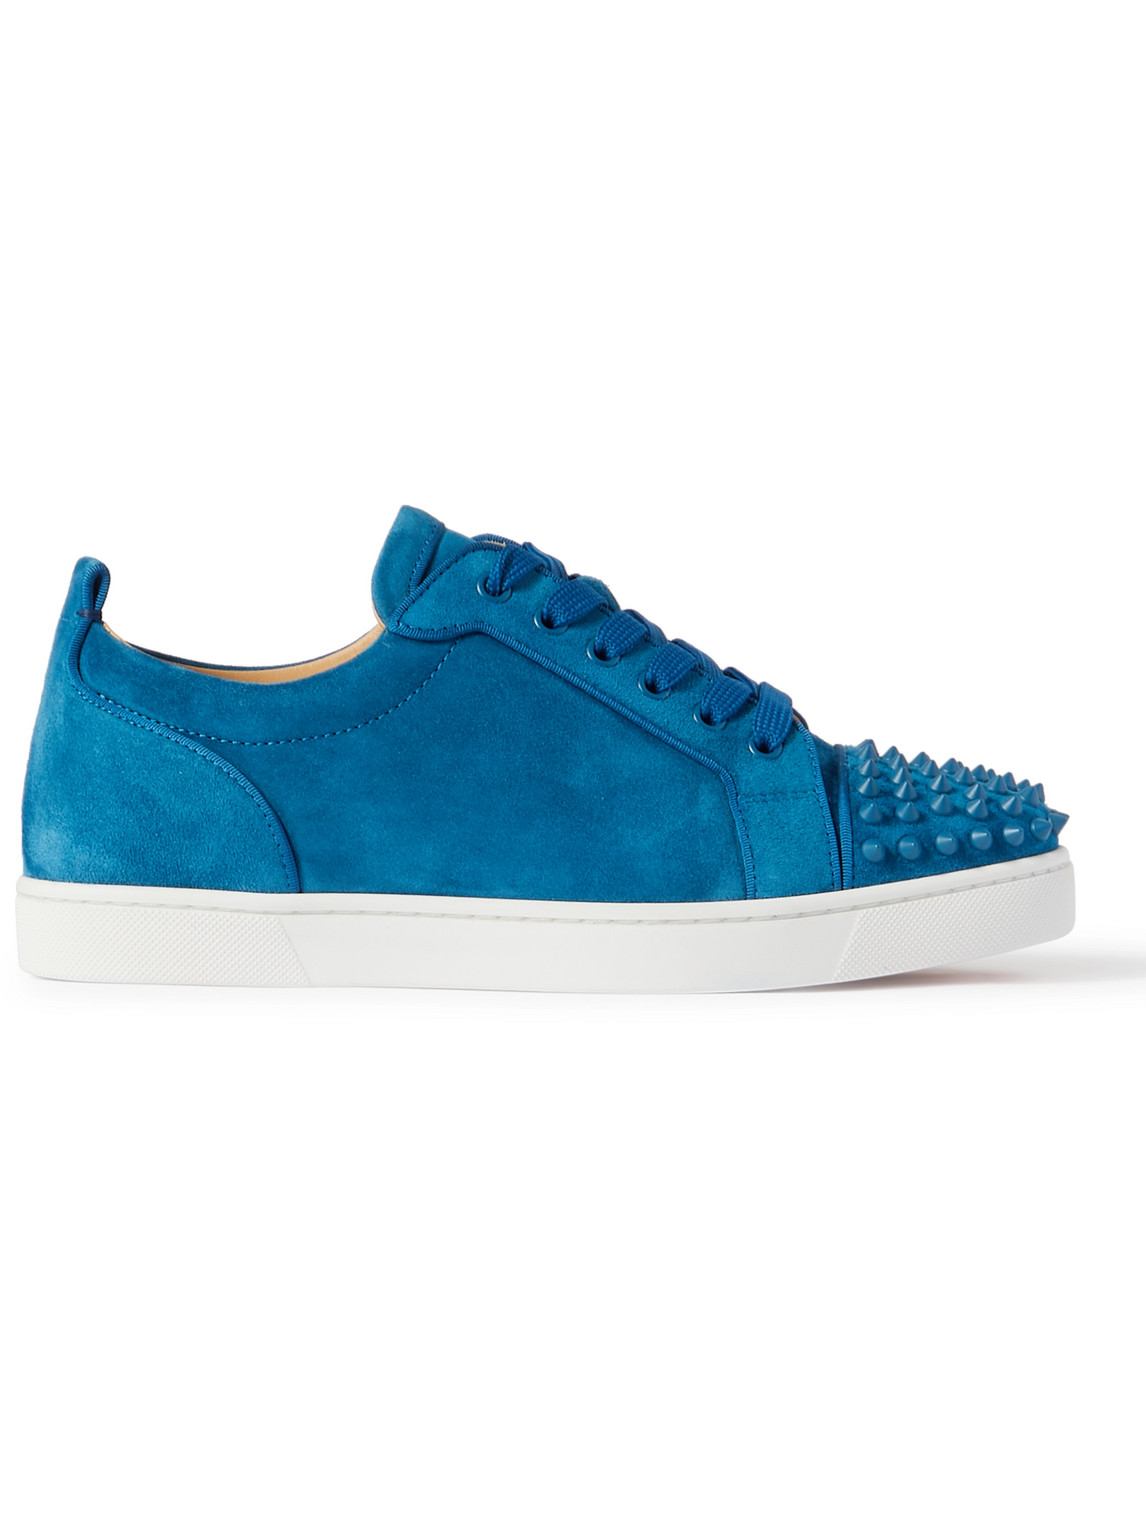 Christian Louboutin Louis Junior Spikes Cap-toe Suede Trainers In Blue